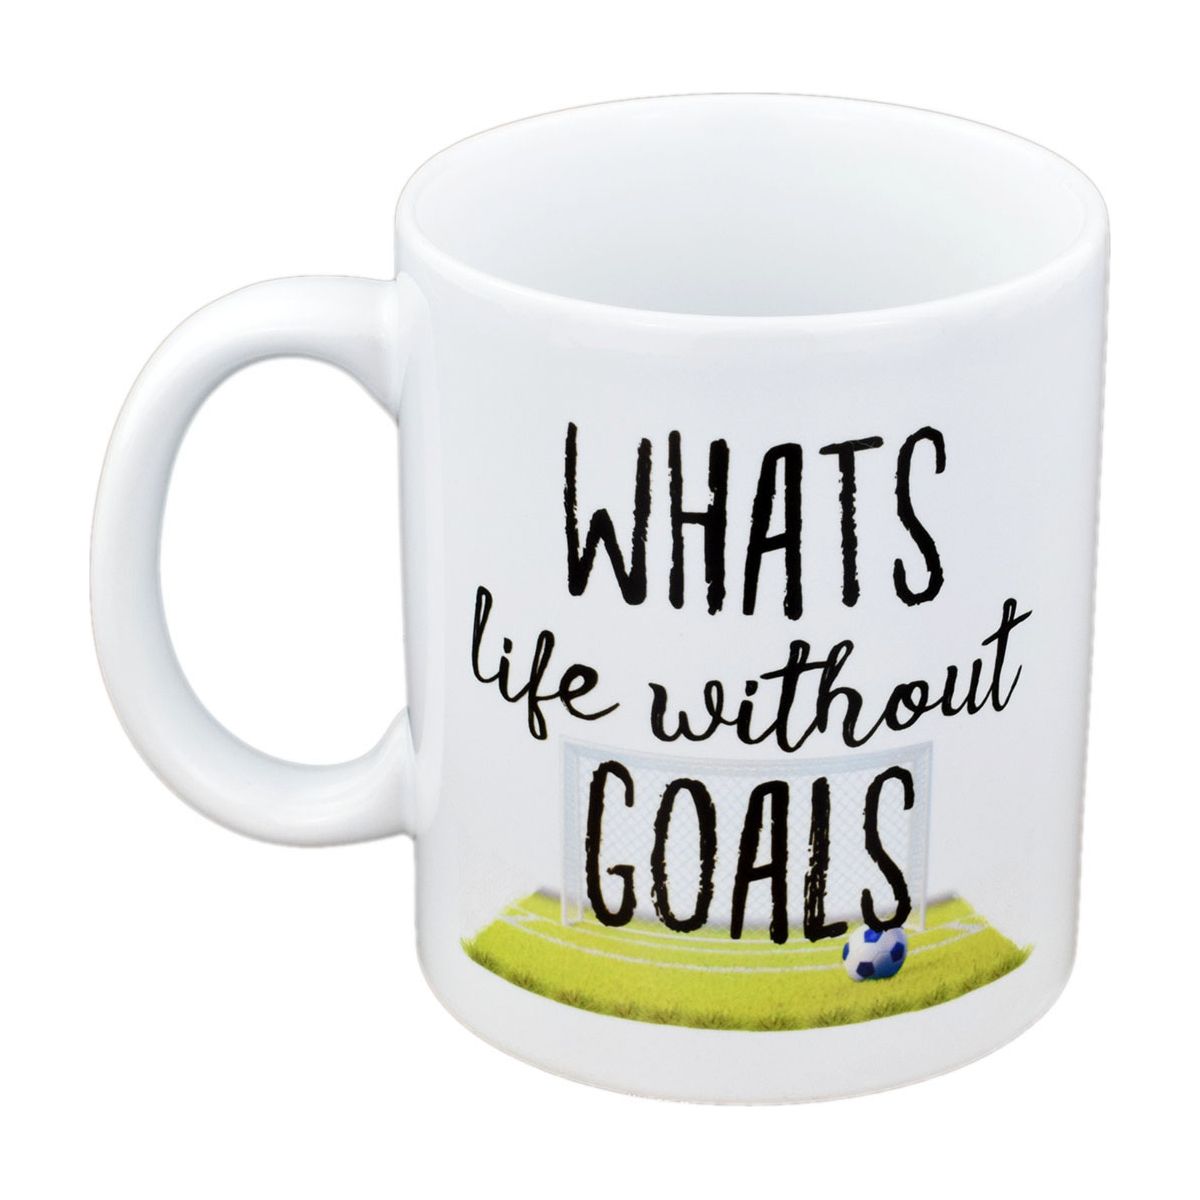 What's Life Without Goals Football Mug - Ashton and Finch